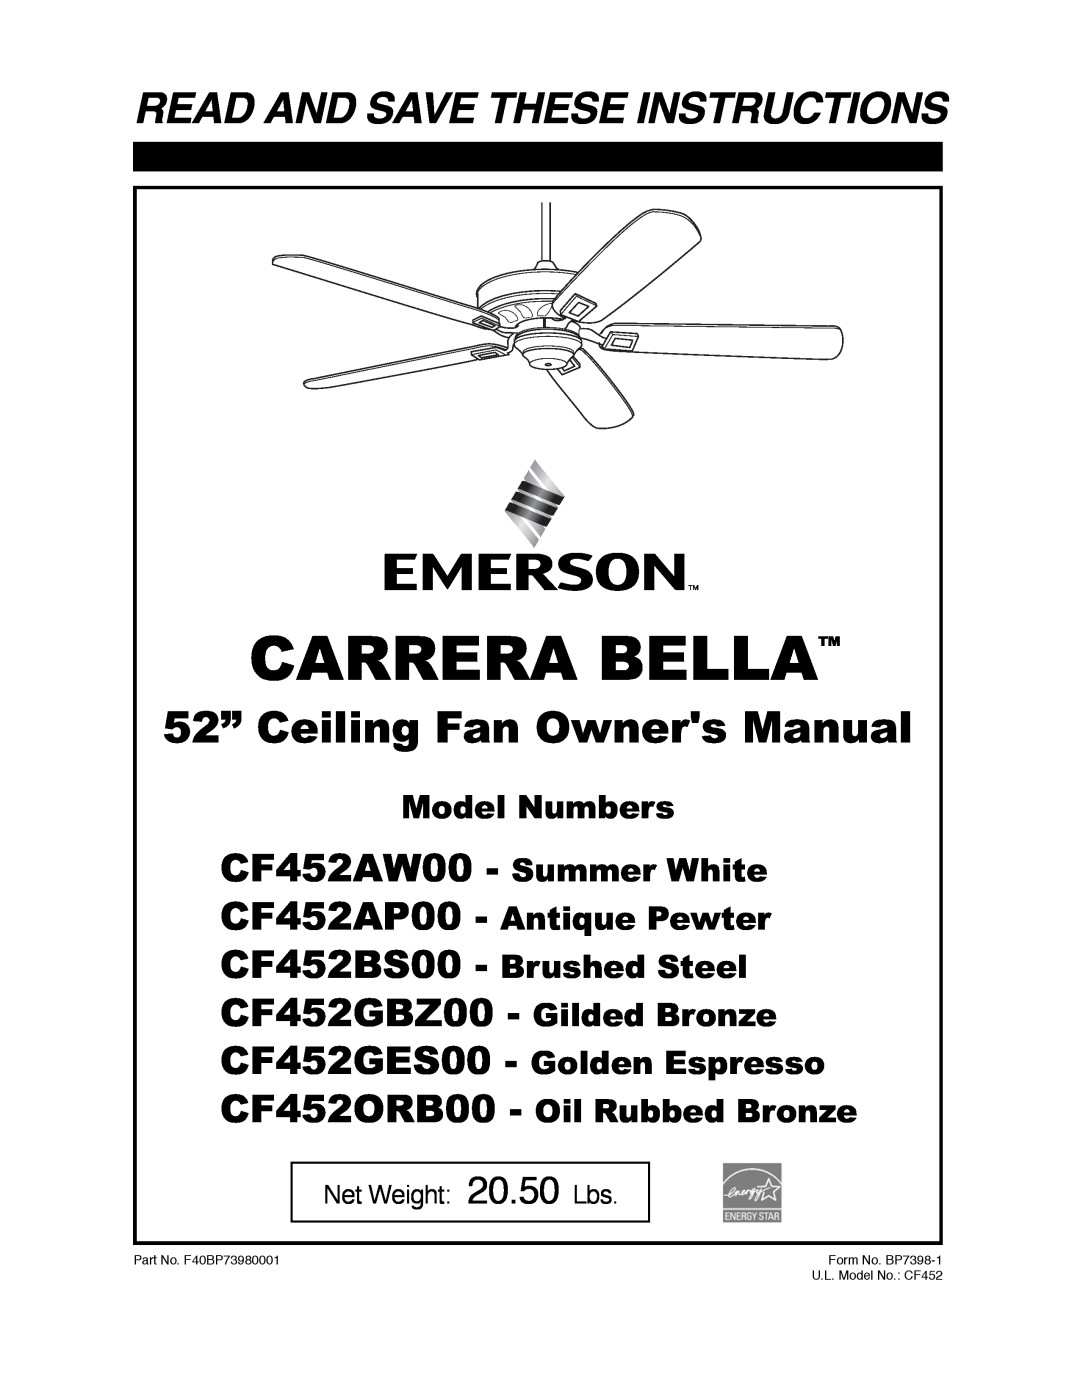 Emerson CF452GBZ00 owner manual Carrera Bella, Read And Save These Instructions, CF452AW00 - Summer White, Model Numbers 